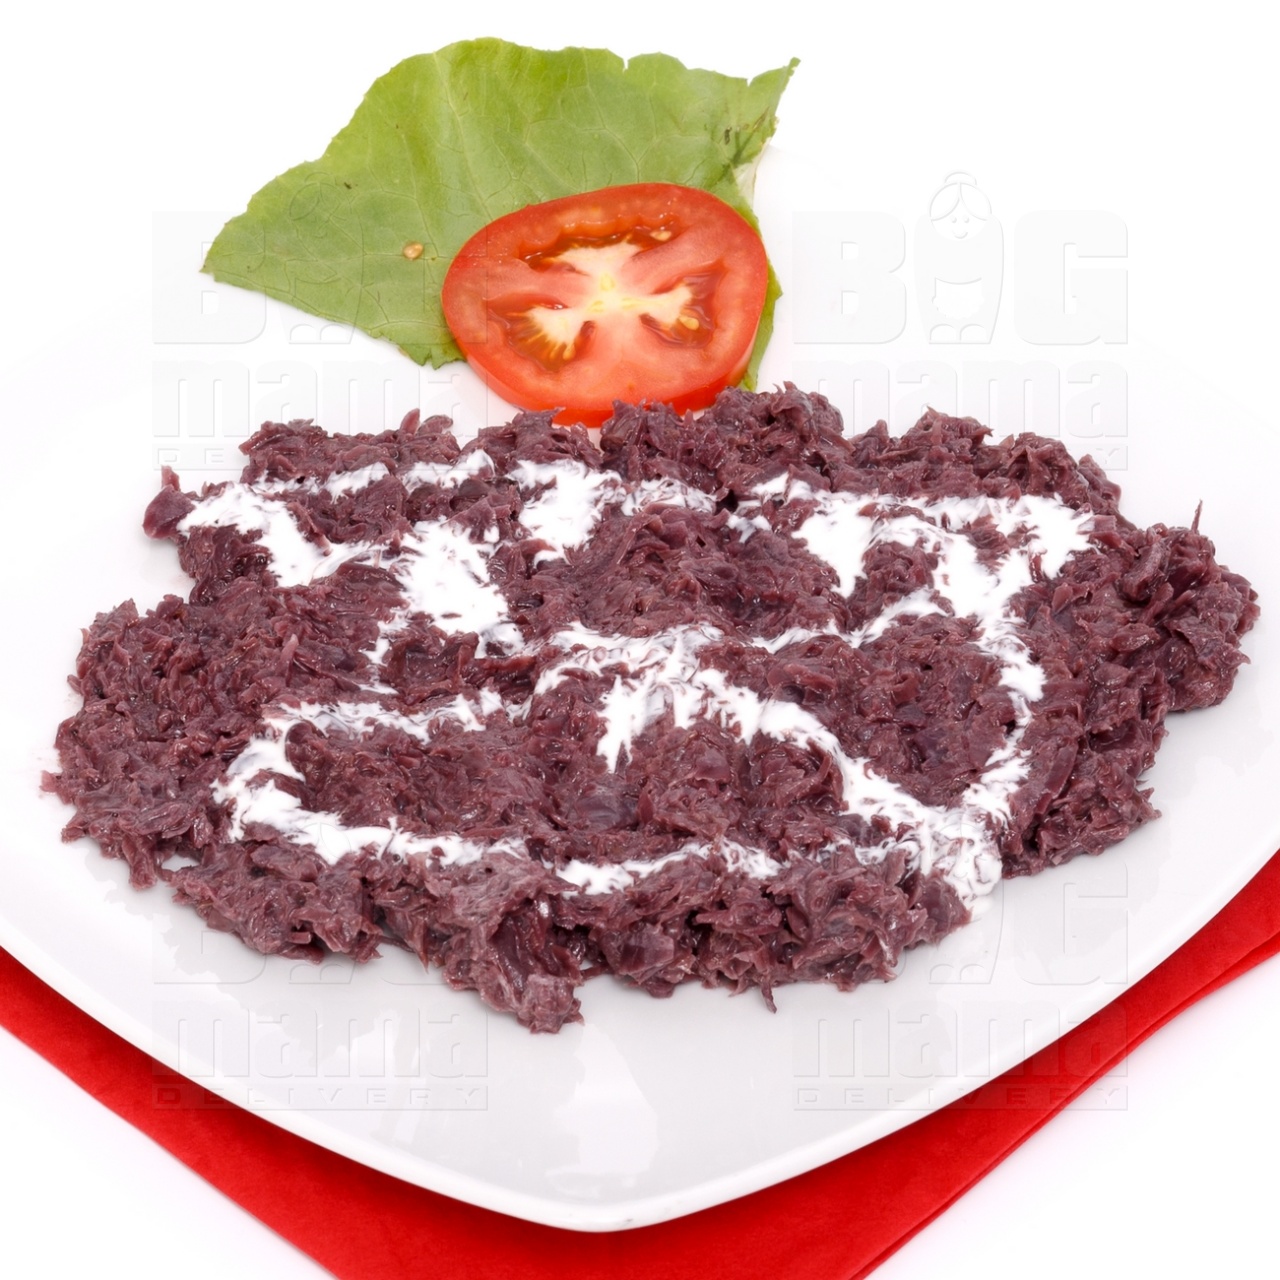 Product #39 image - Stewed red cabbage